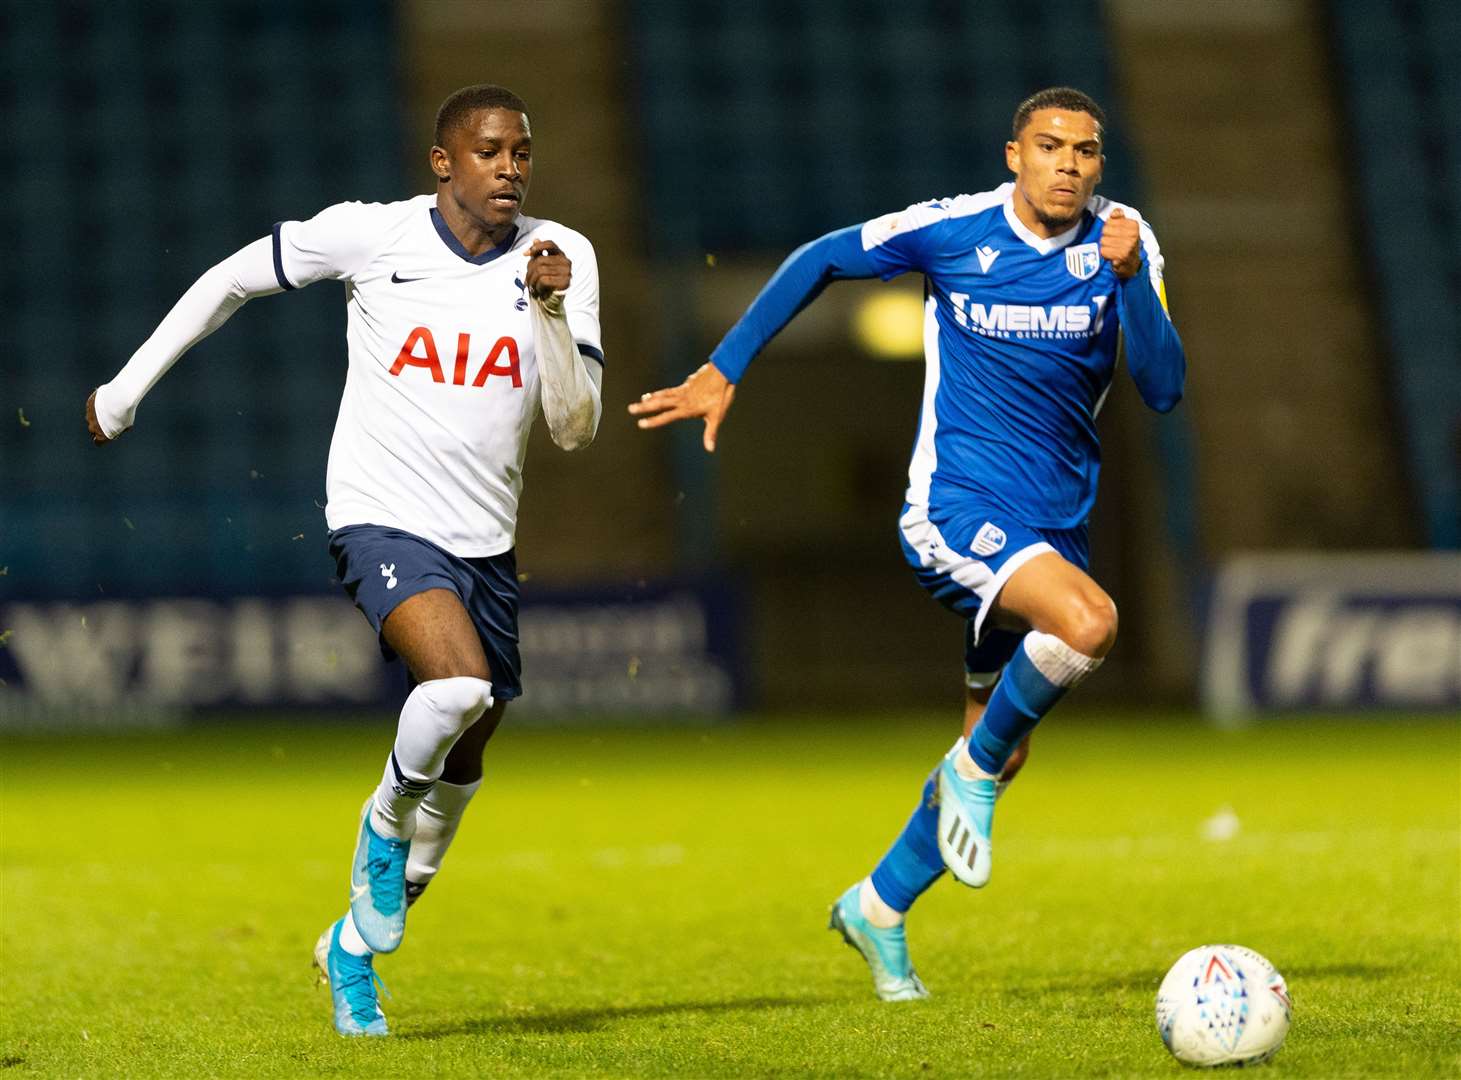 Shilow Tracey in action for Spurs at Priestfield in the EFL Trophy earlier this season